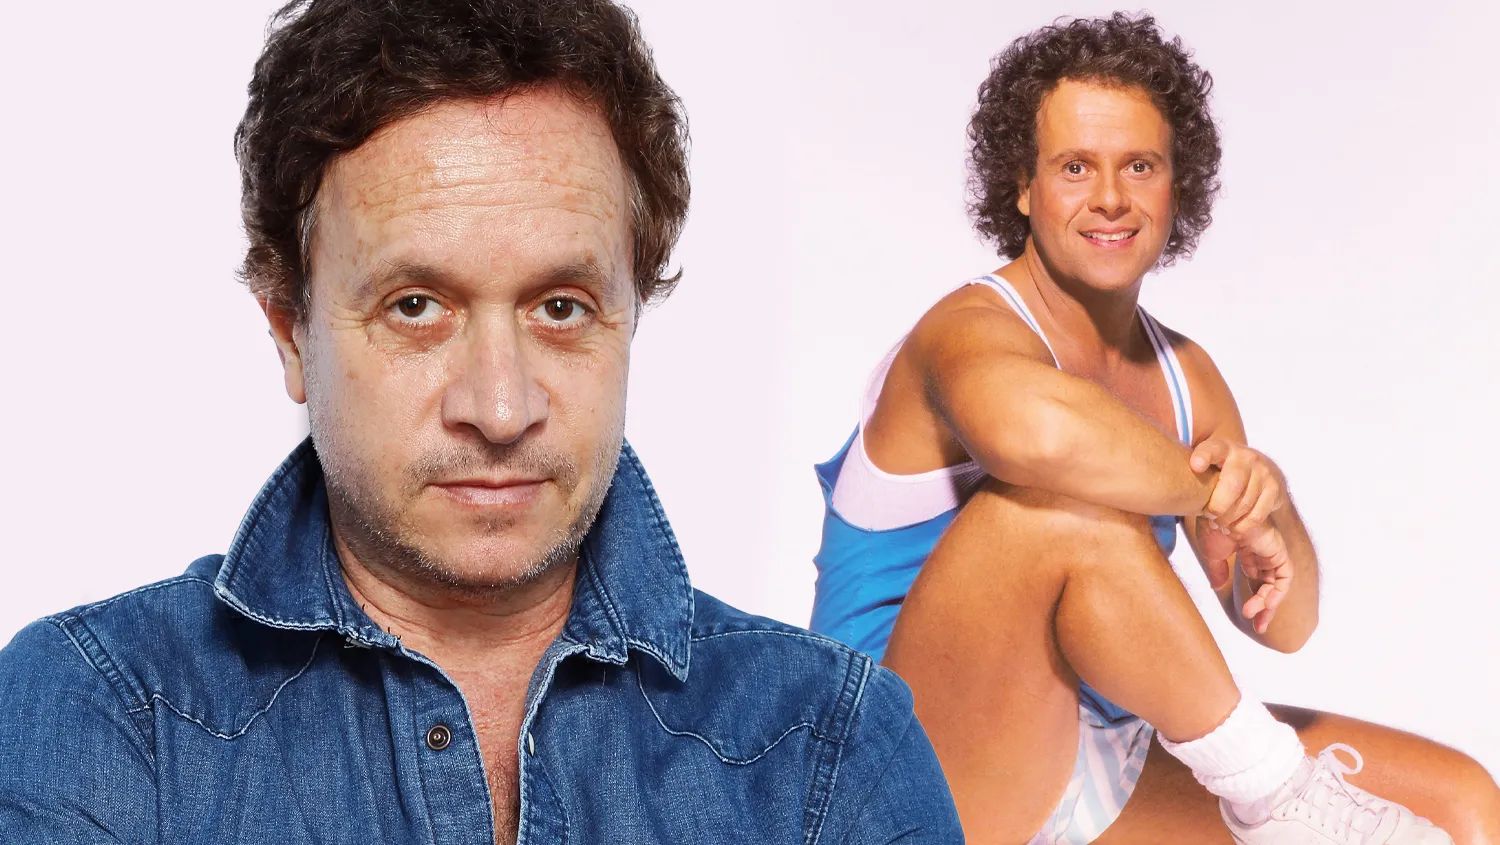 pauly-shores-response-to-richard-simmons-disavowing-biopic-film